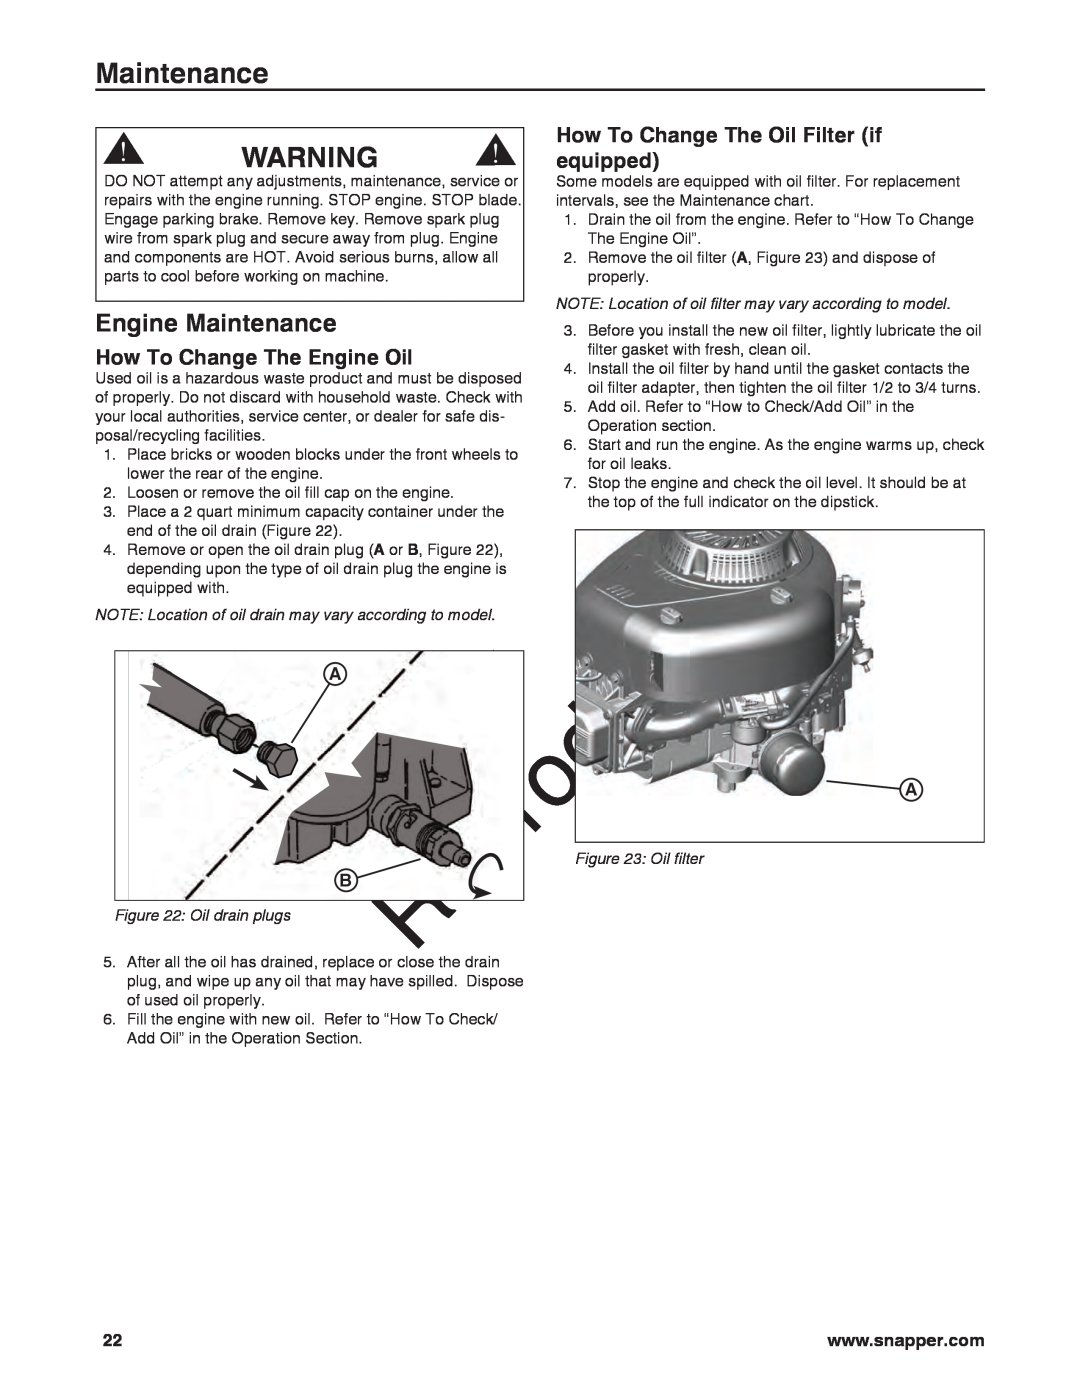 Briggs & Stratton 7800920-00 Engine Maintenance, How To Change The Oil Filter if, equipped, How To Change The Engine Oil 